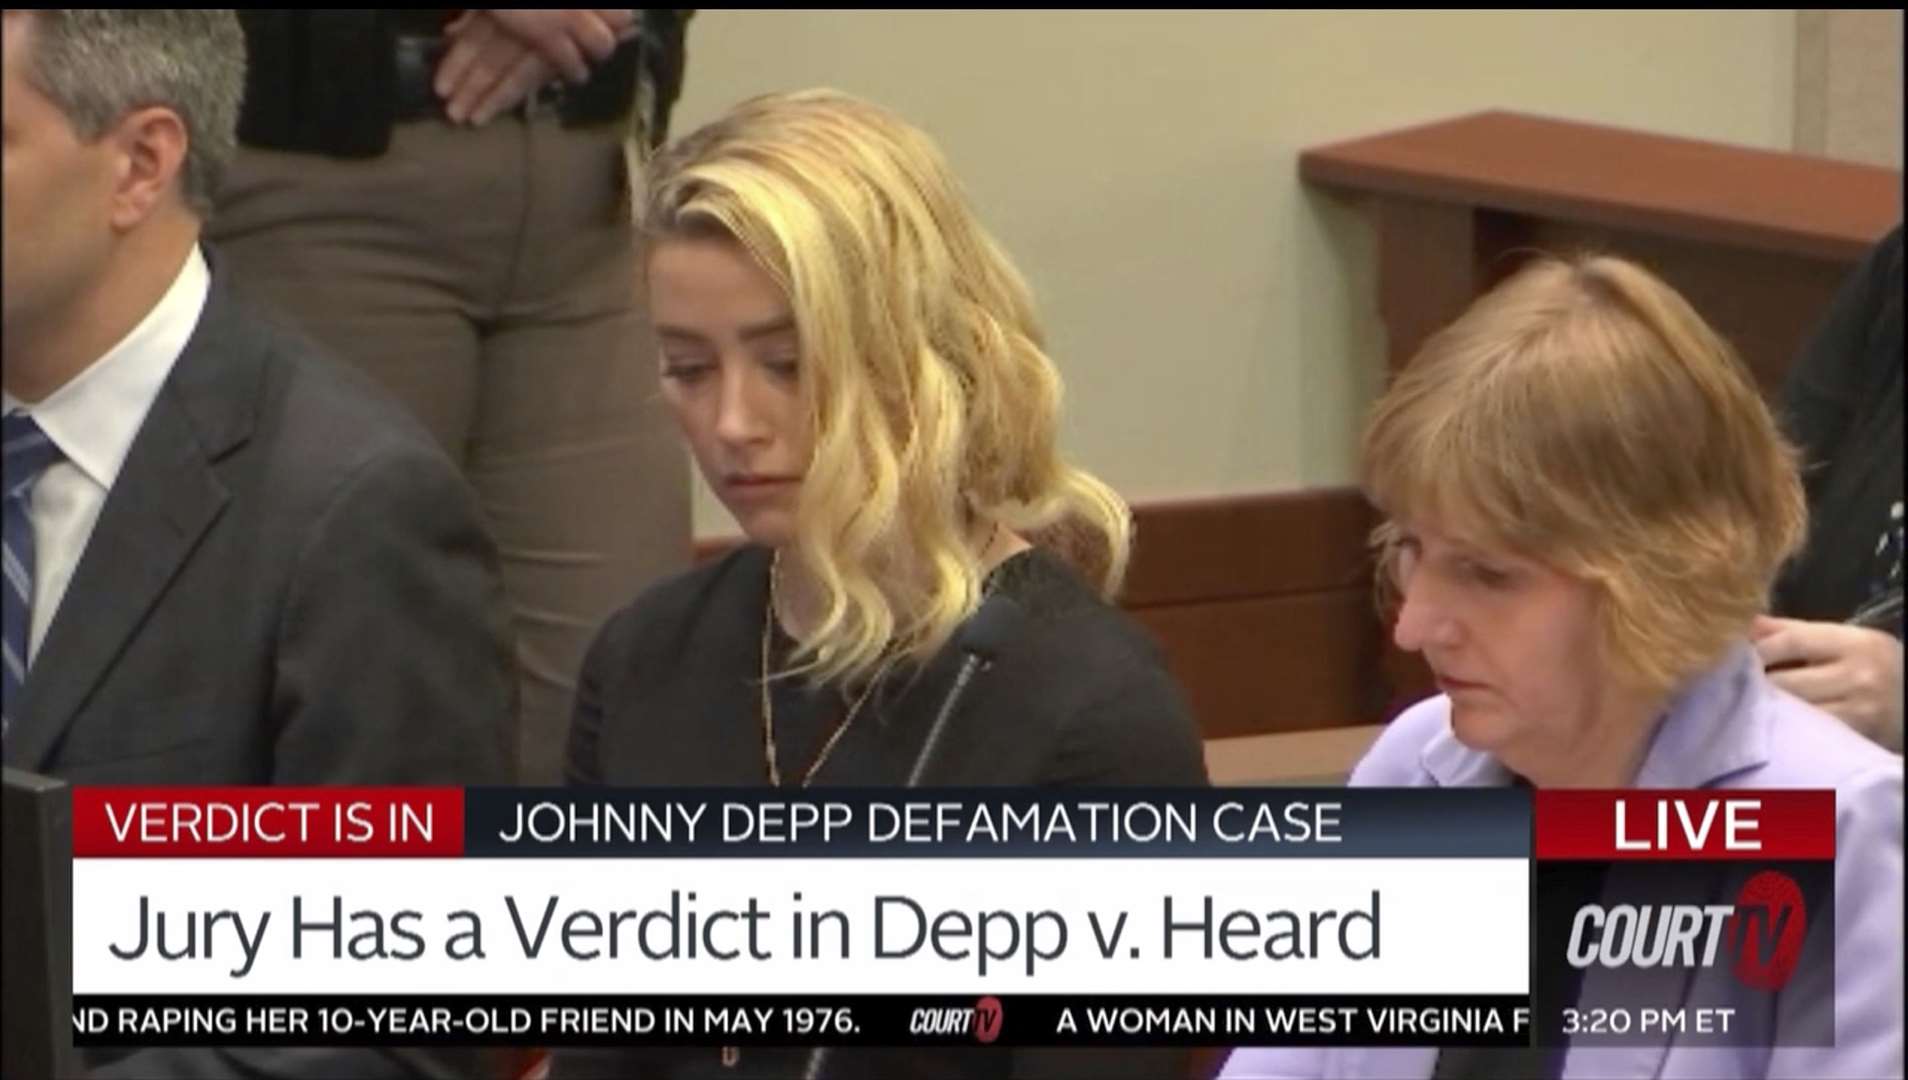 Ms Heard, who was present, was sitting between members of her legal team at the front of the court room, looked downcast as the ruling was read out by the judge (Court TV/AP)